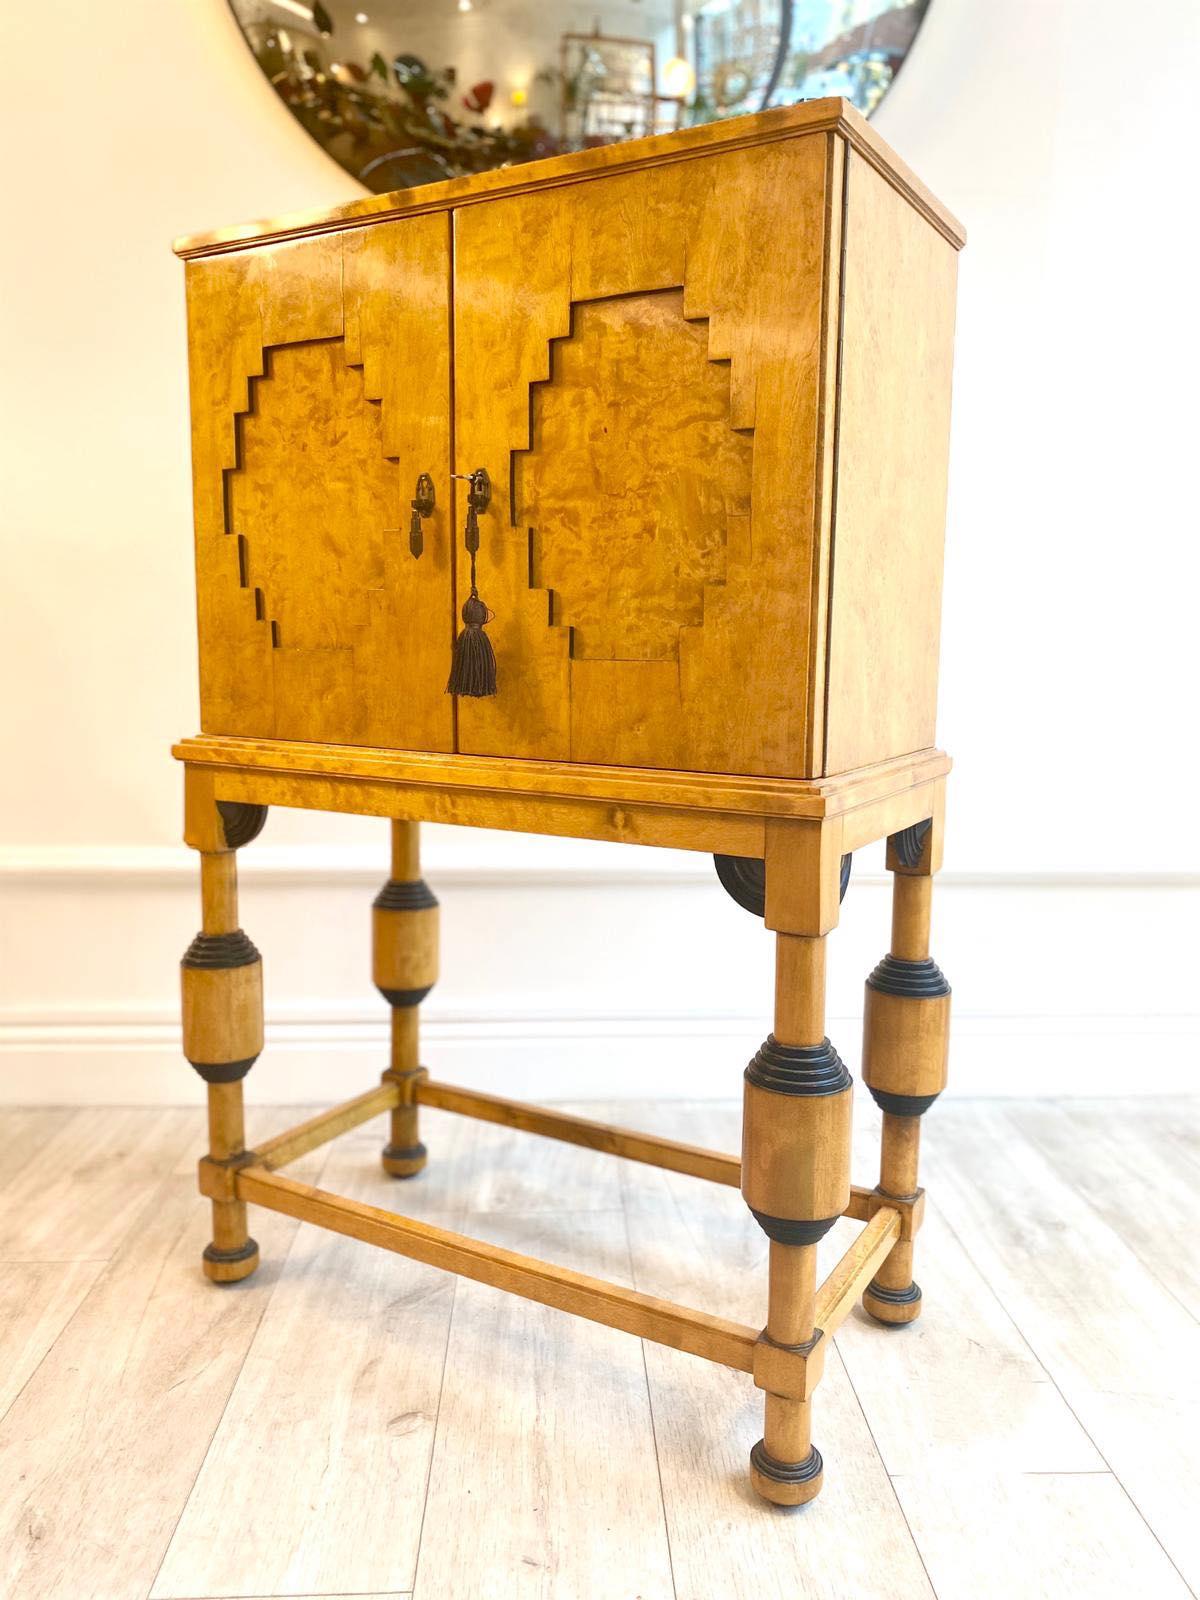 Beautiful and rare 1920s Art Deco cabinet on tall turned legs made from birch and ebonised wood. The body of the cabinet has two doors which incloses 5 drawers with beautiful inlaid detailing and ebonised handles.

Very useful and stylish cabinet